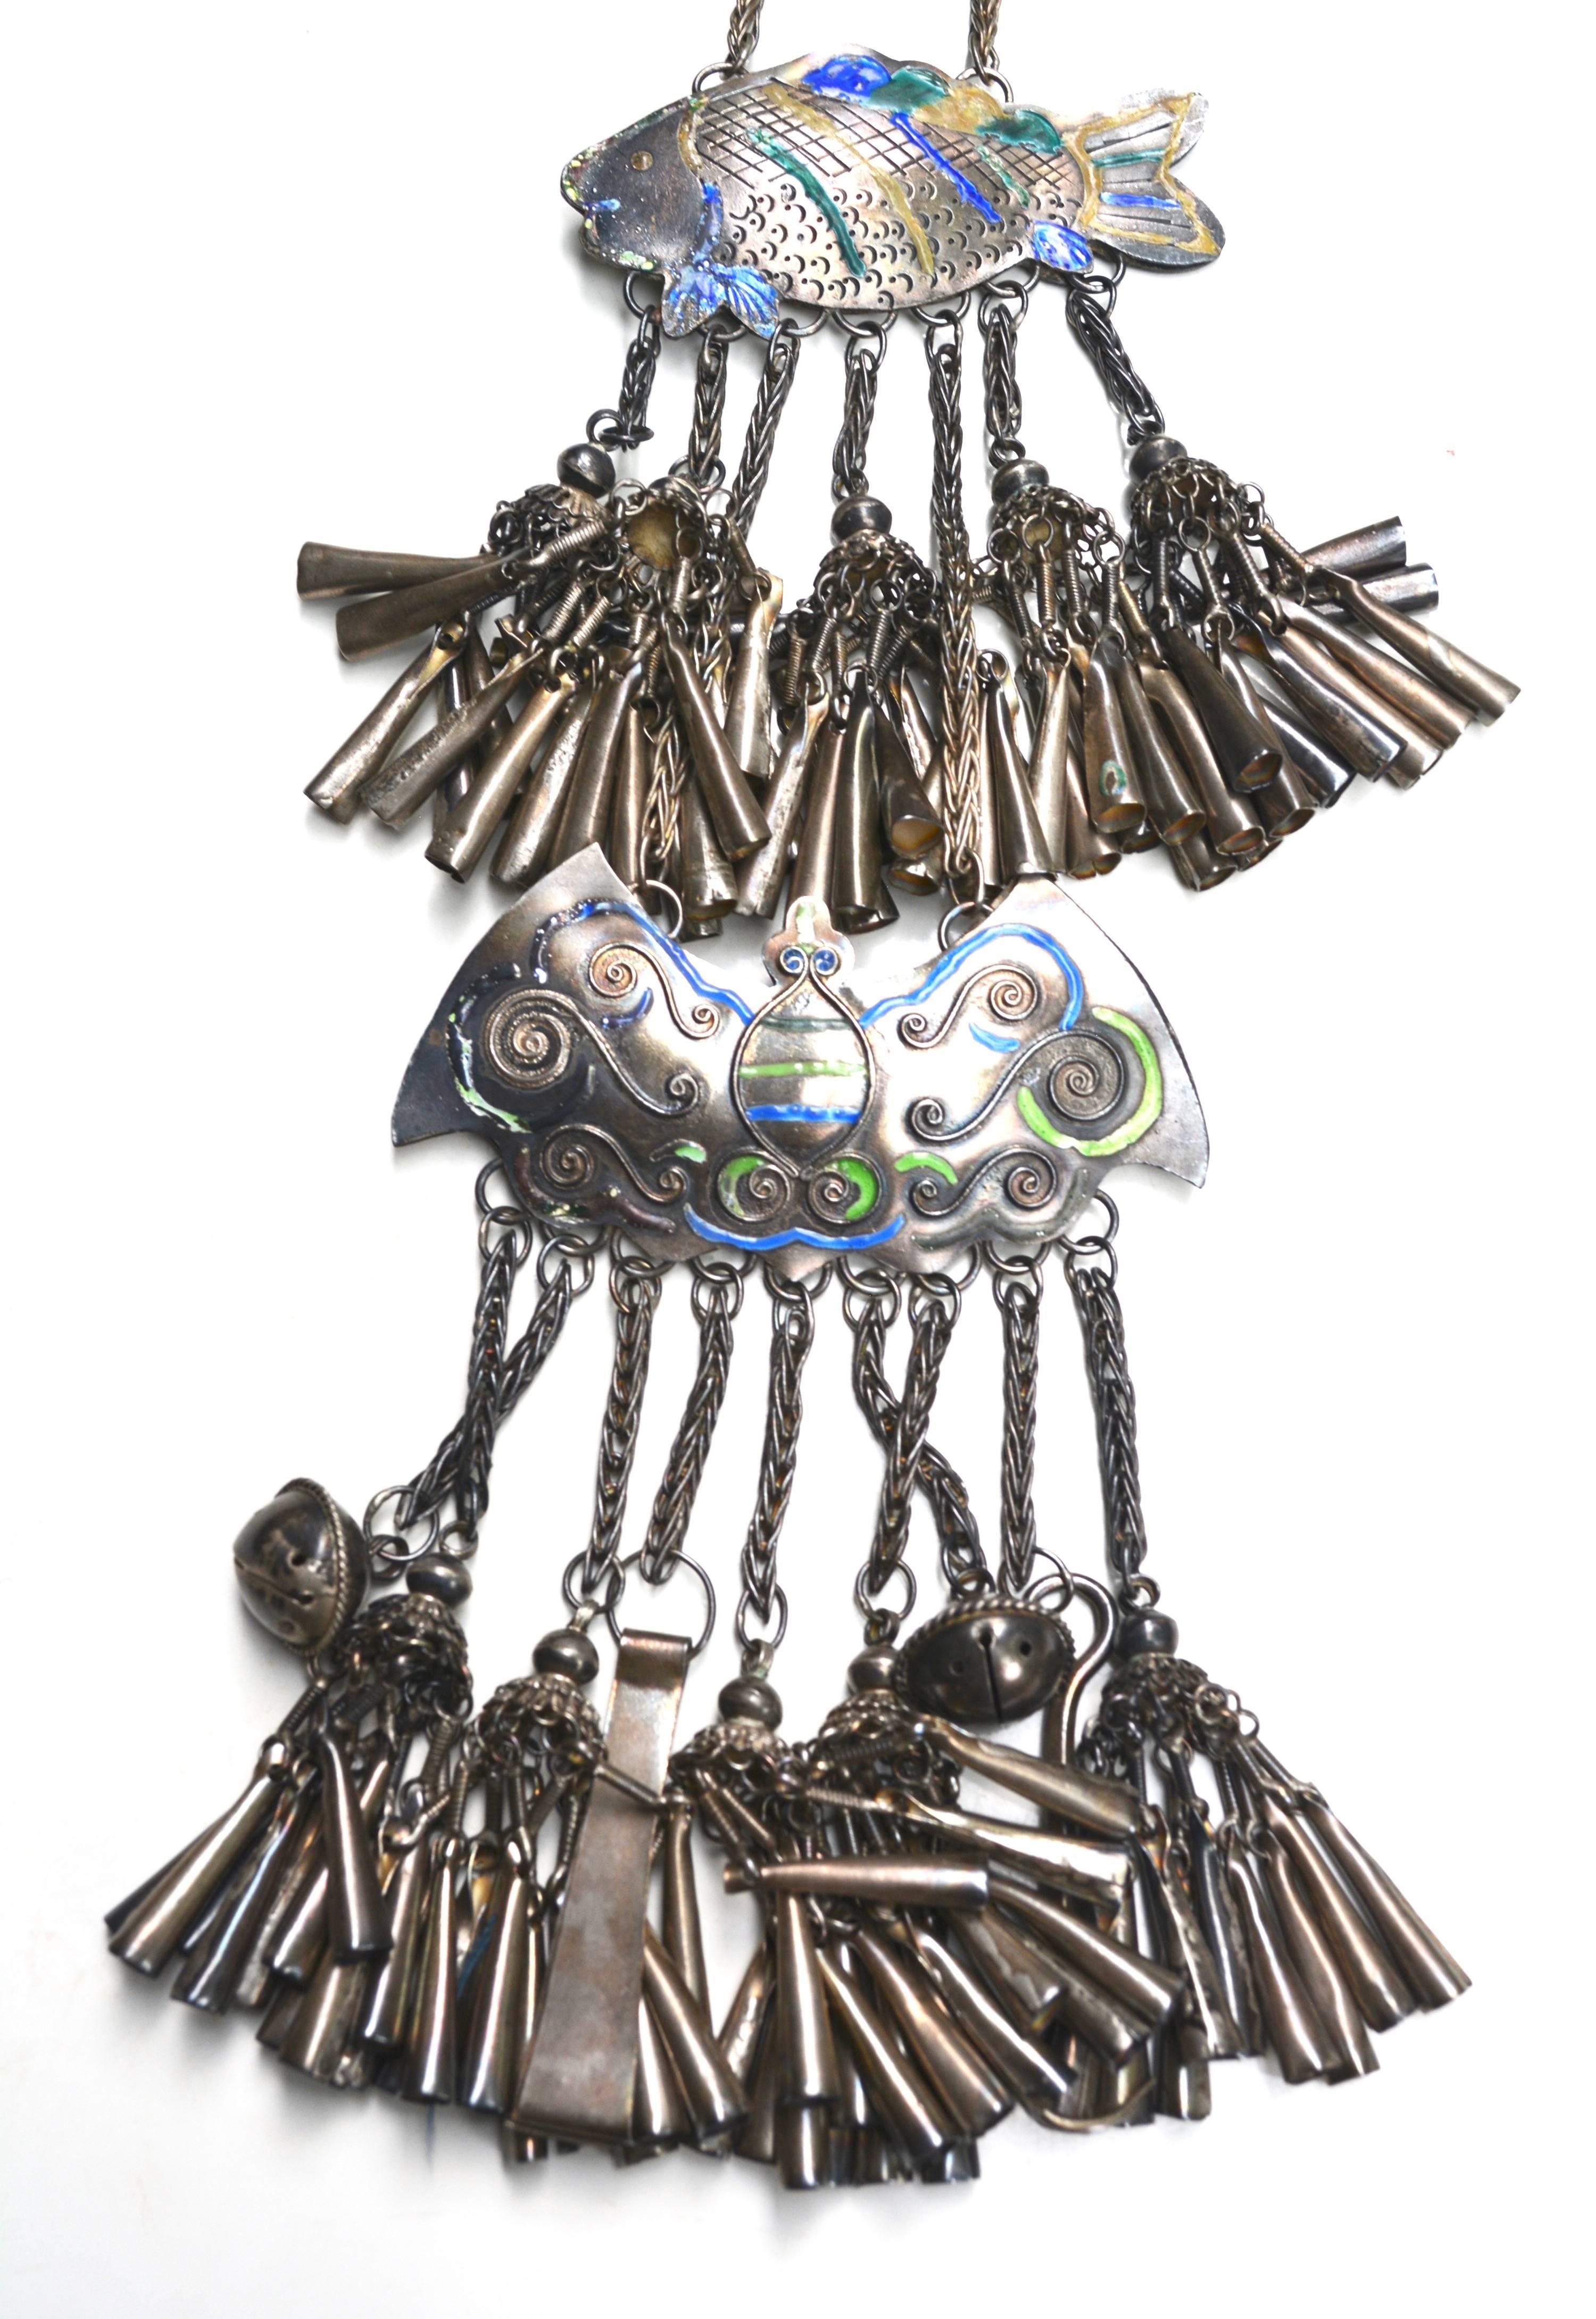 Older rare Miao silver oversized fringe fish and bat collar. Made by the Miao ethnic group from southern China. From a lifetime collection of important pieces from India, Asian and Africa.  The piece unlatches to extend the collar size, but I was